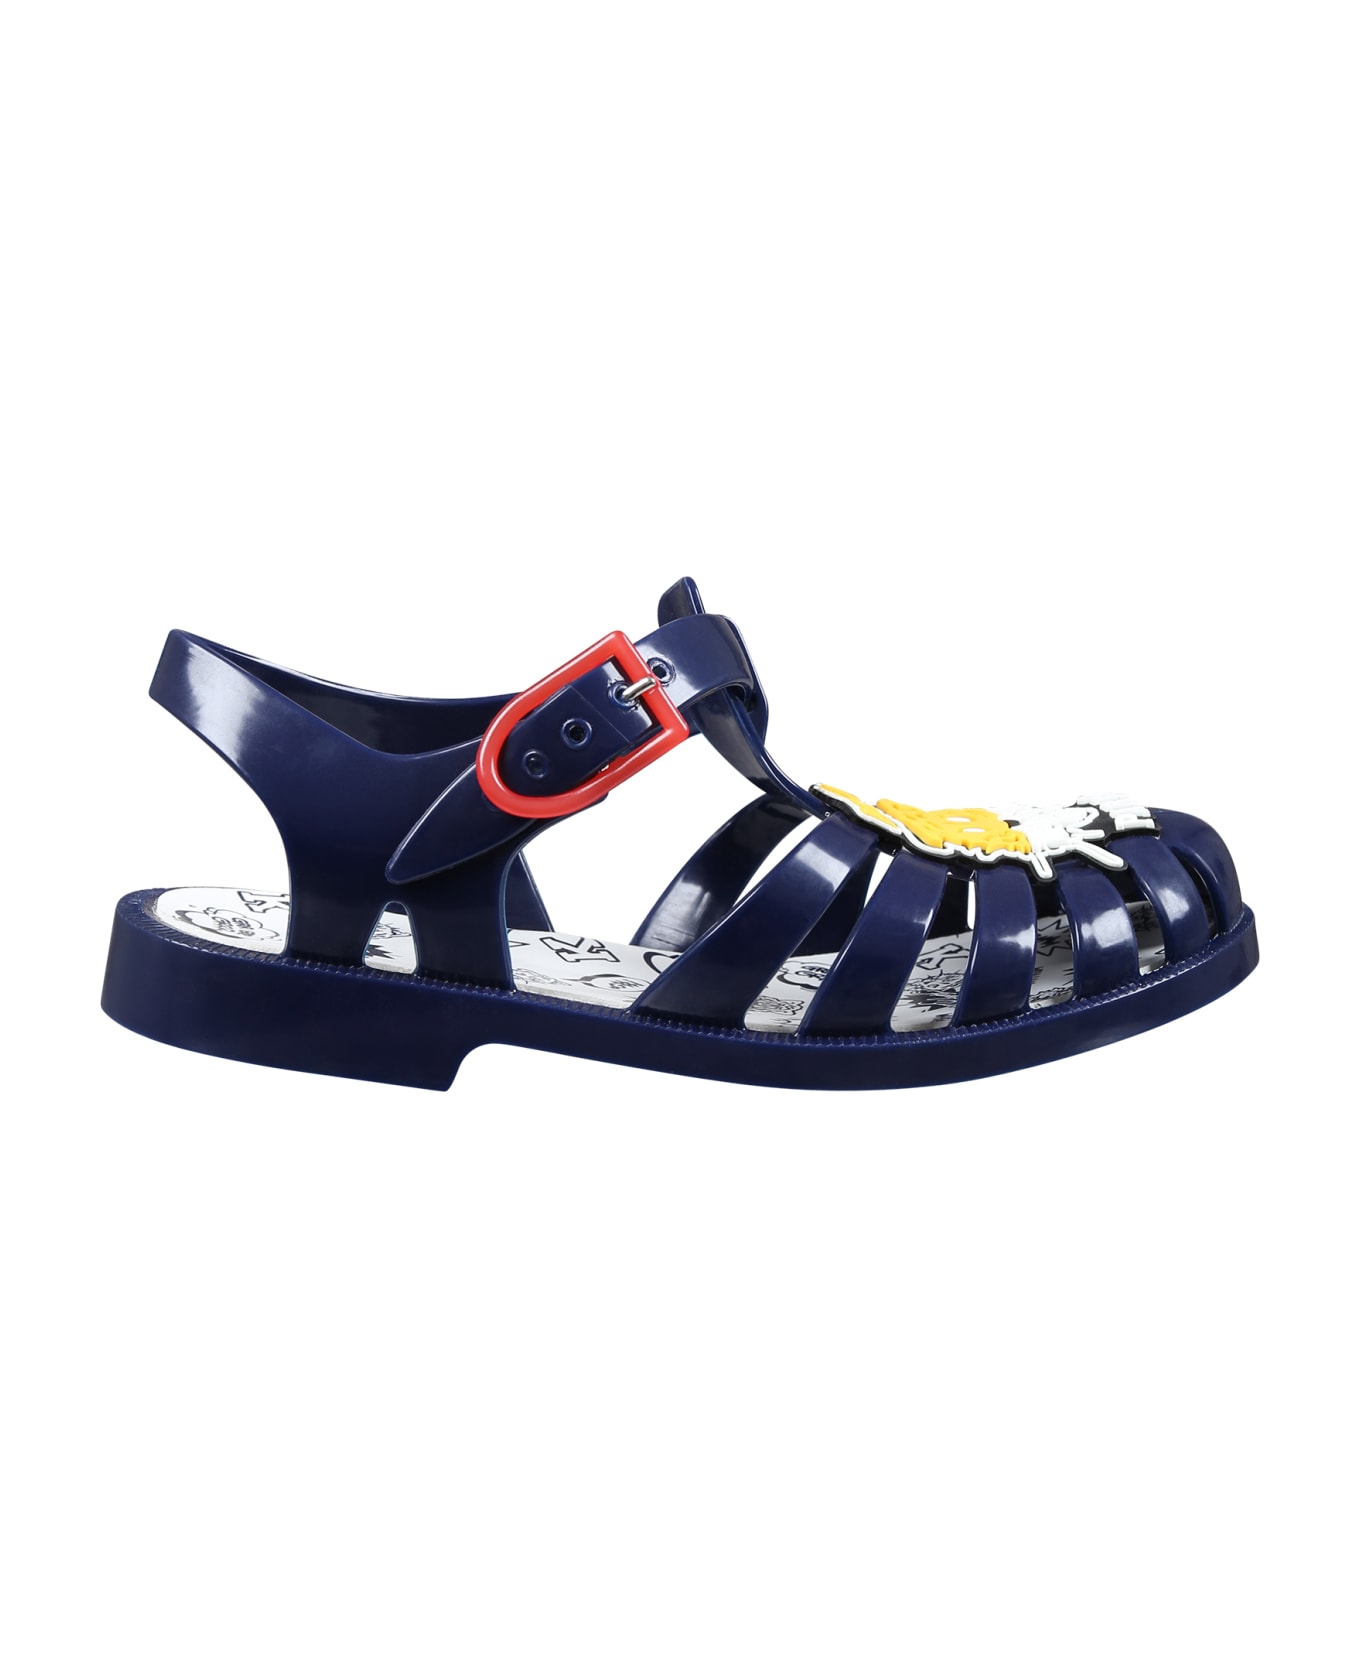 Kenzo Kids Blue Sandals For Boy With Tiger - Blue